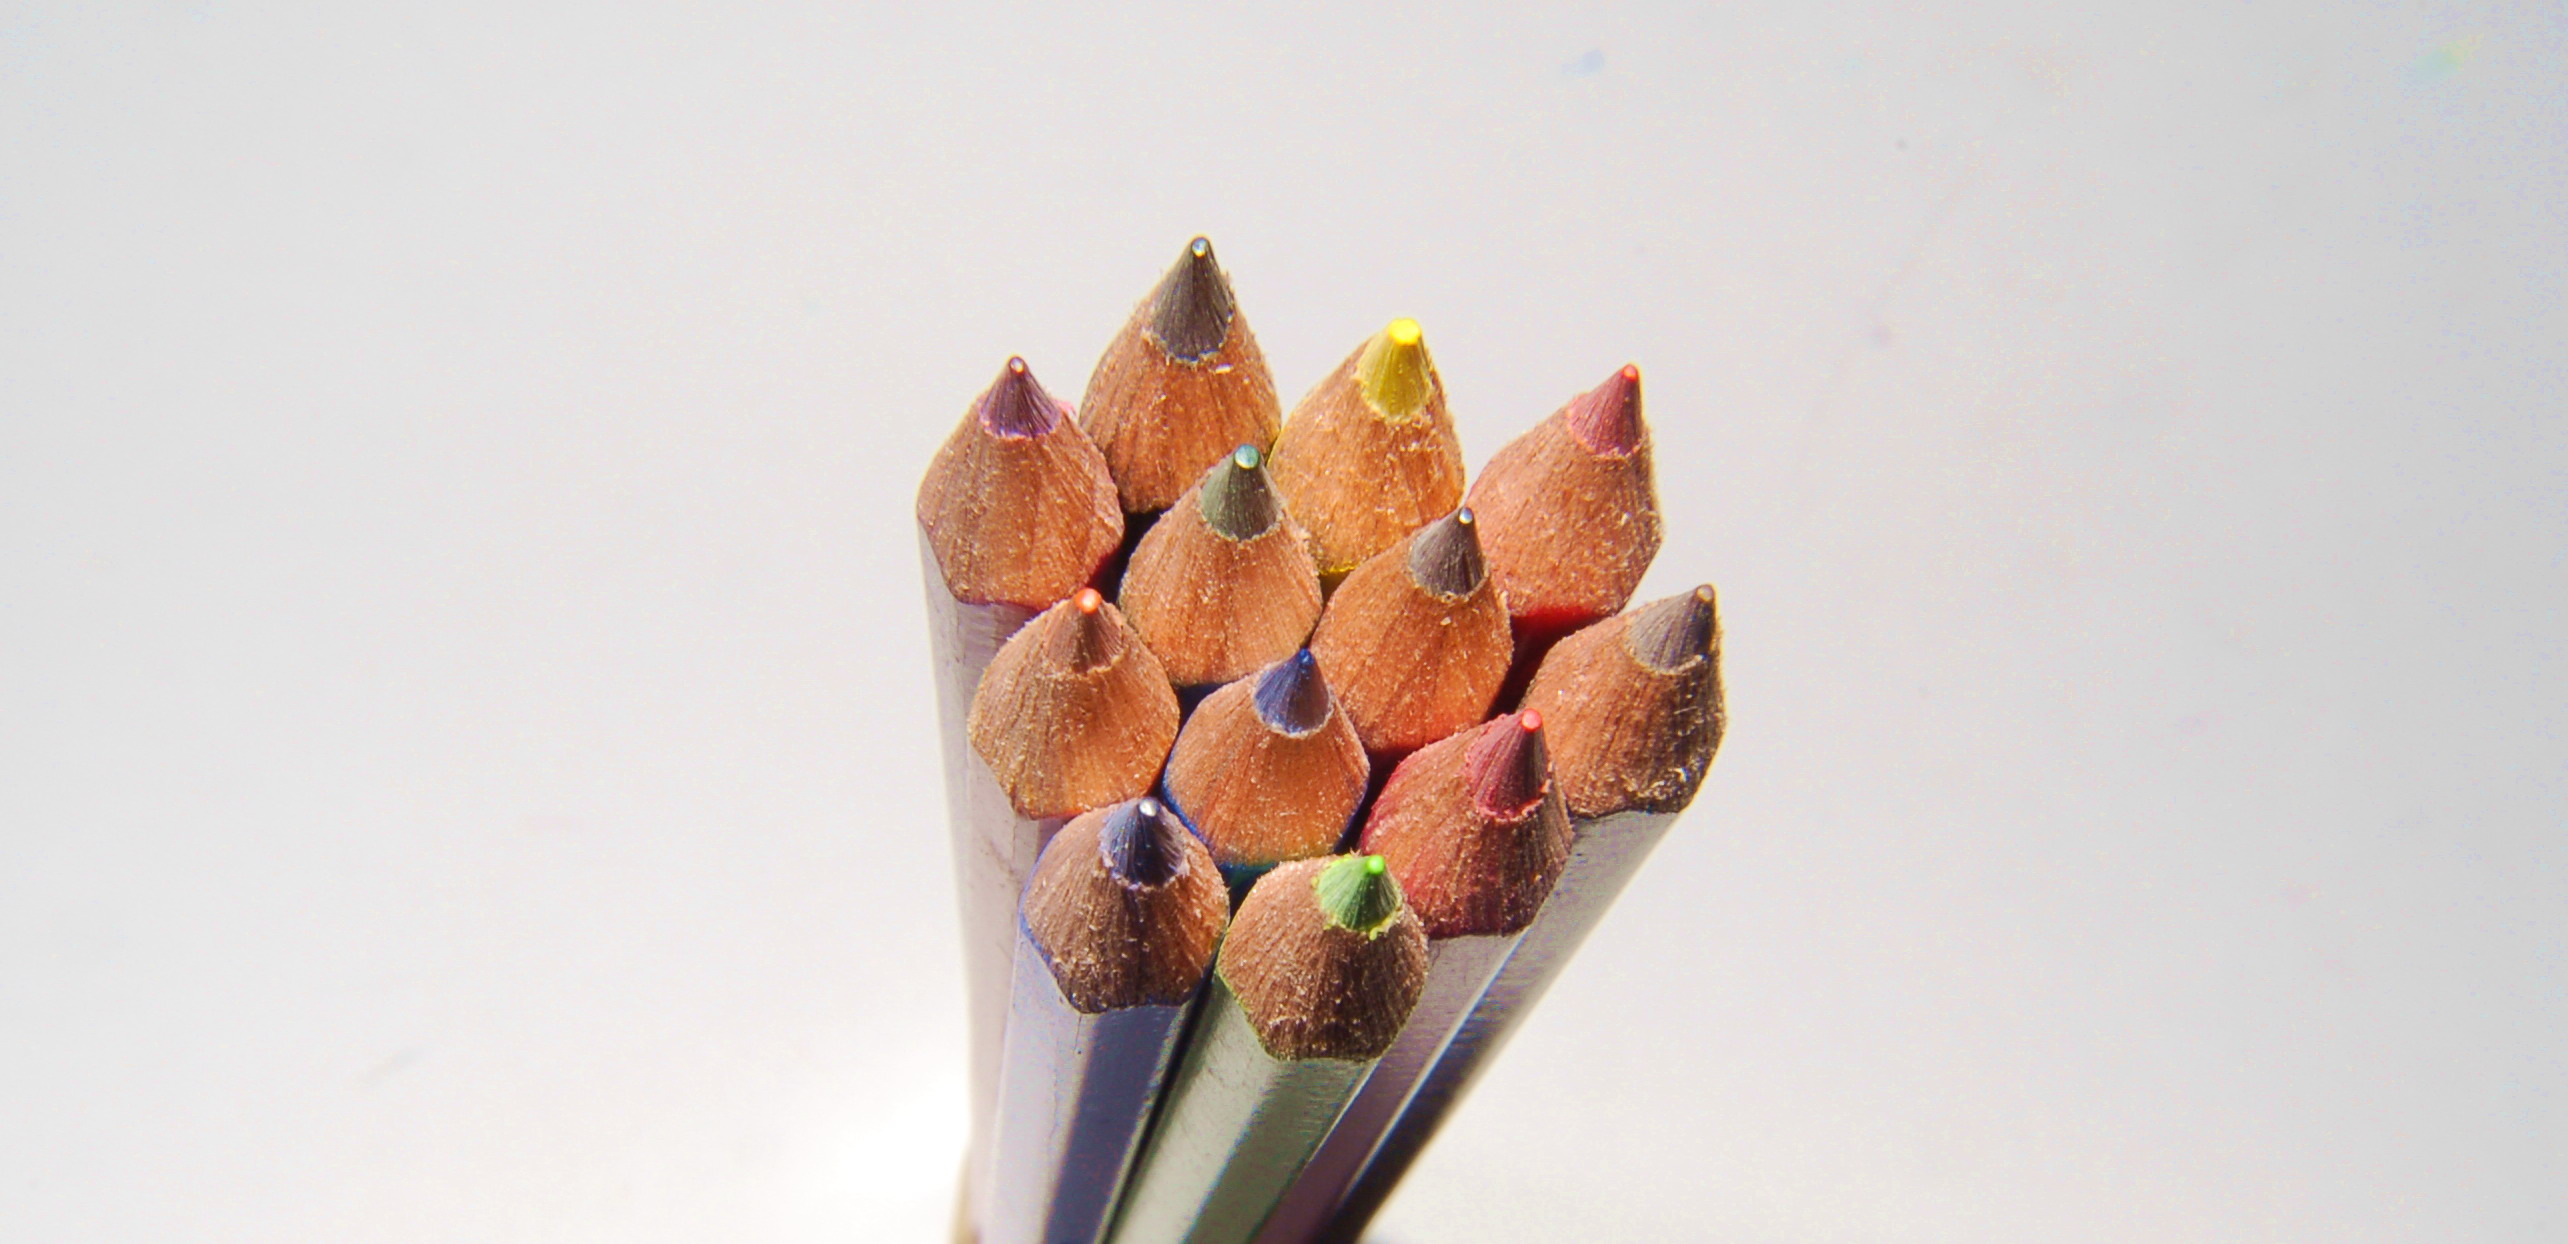 Crayons, Art, Colored, Colors, Draw, HQ Photo